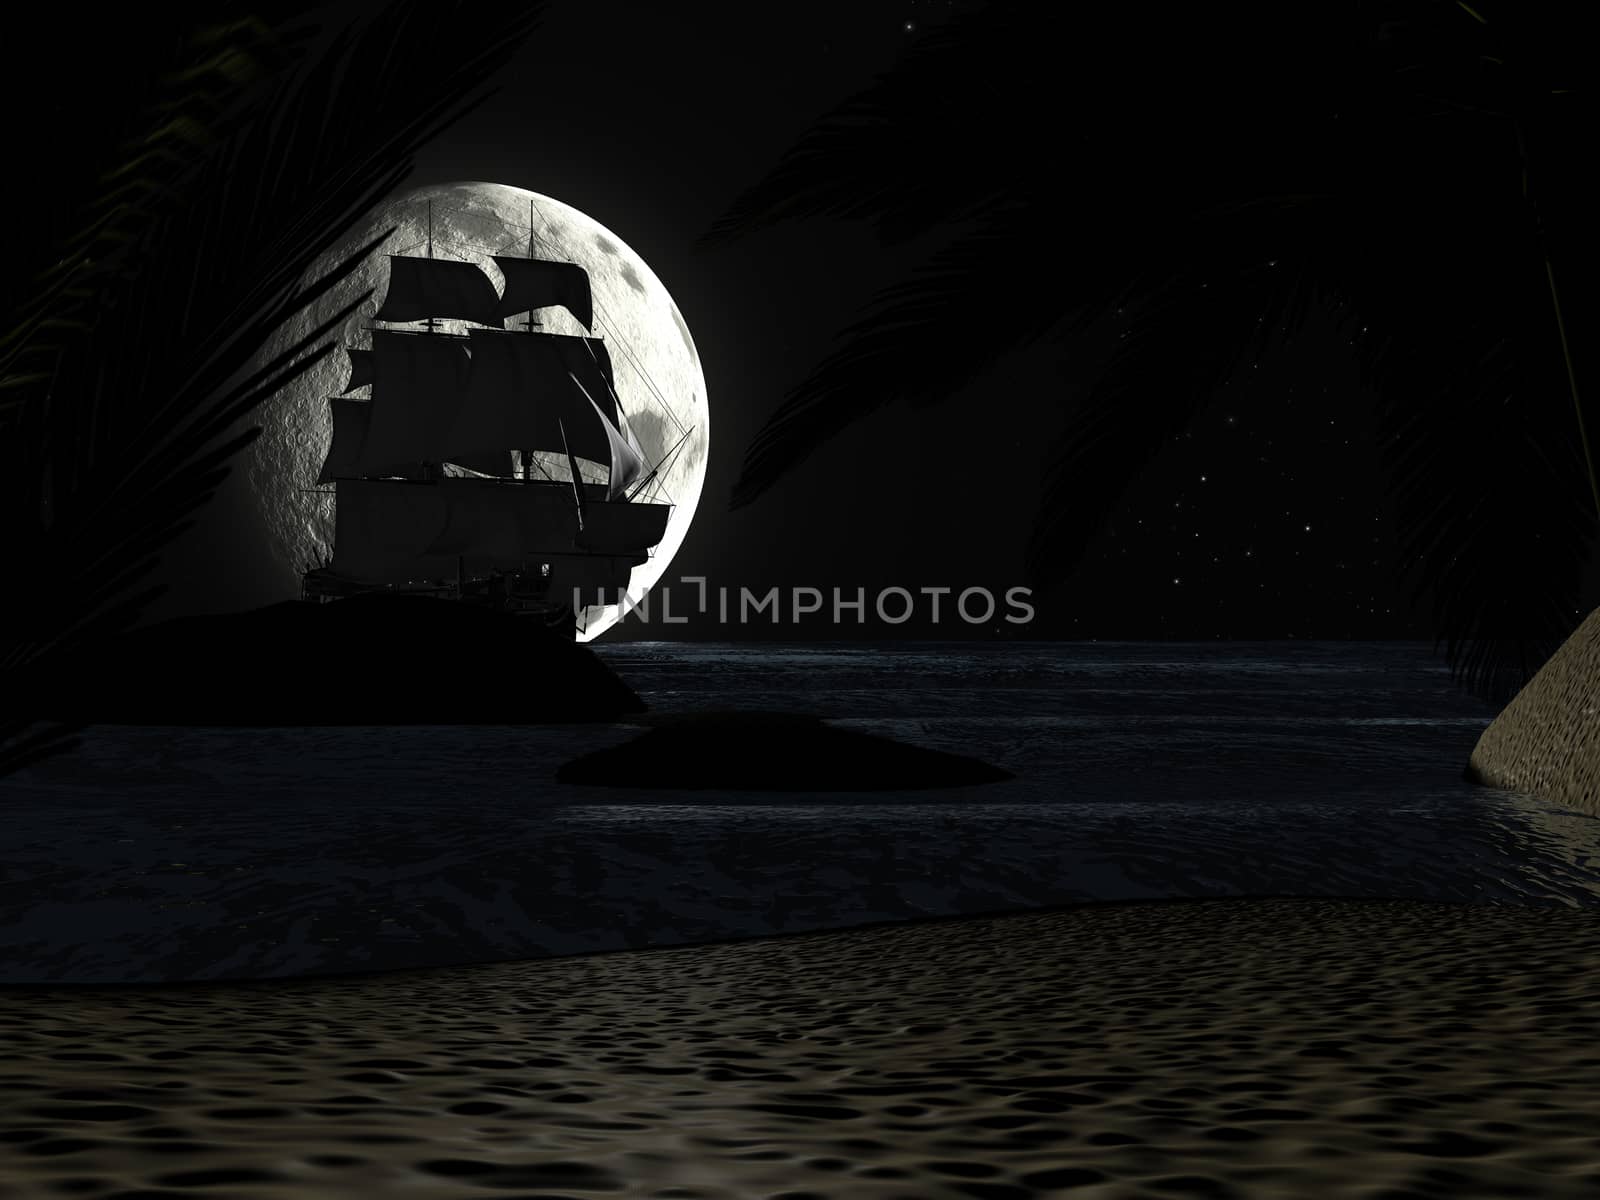 Tropical Beach at Night Moonlight, with Sailboat. by ankarb